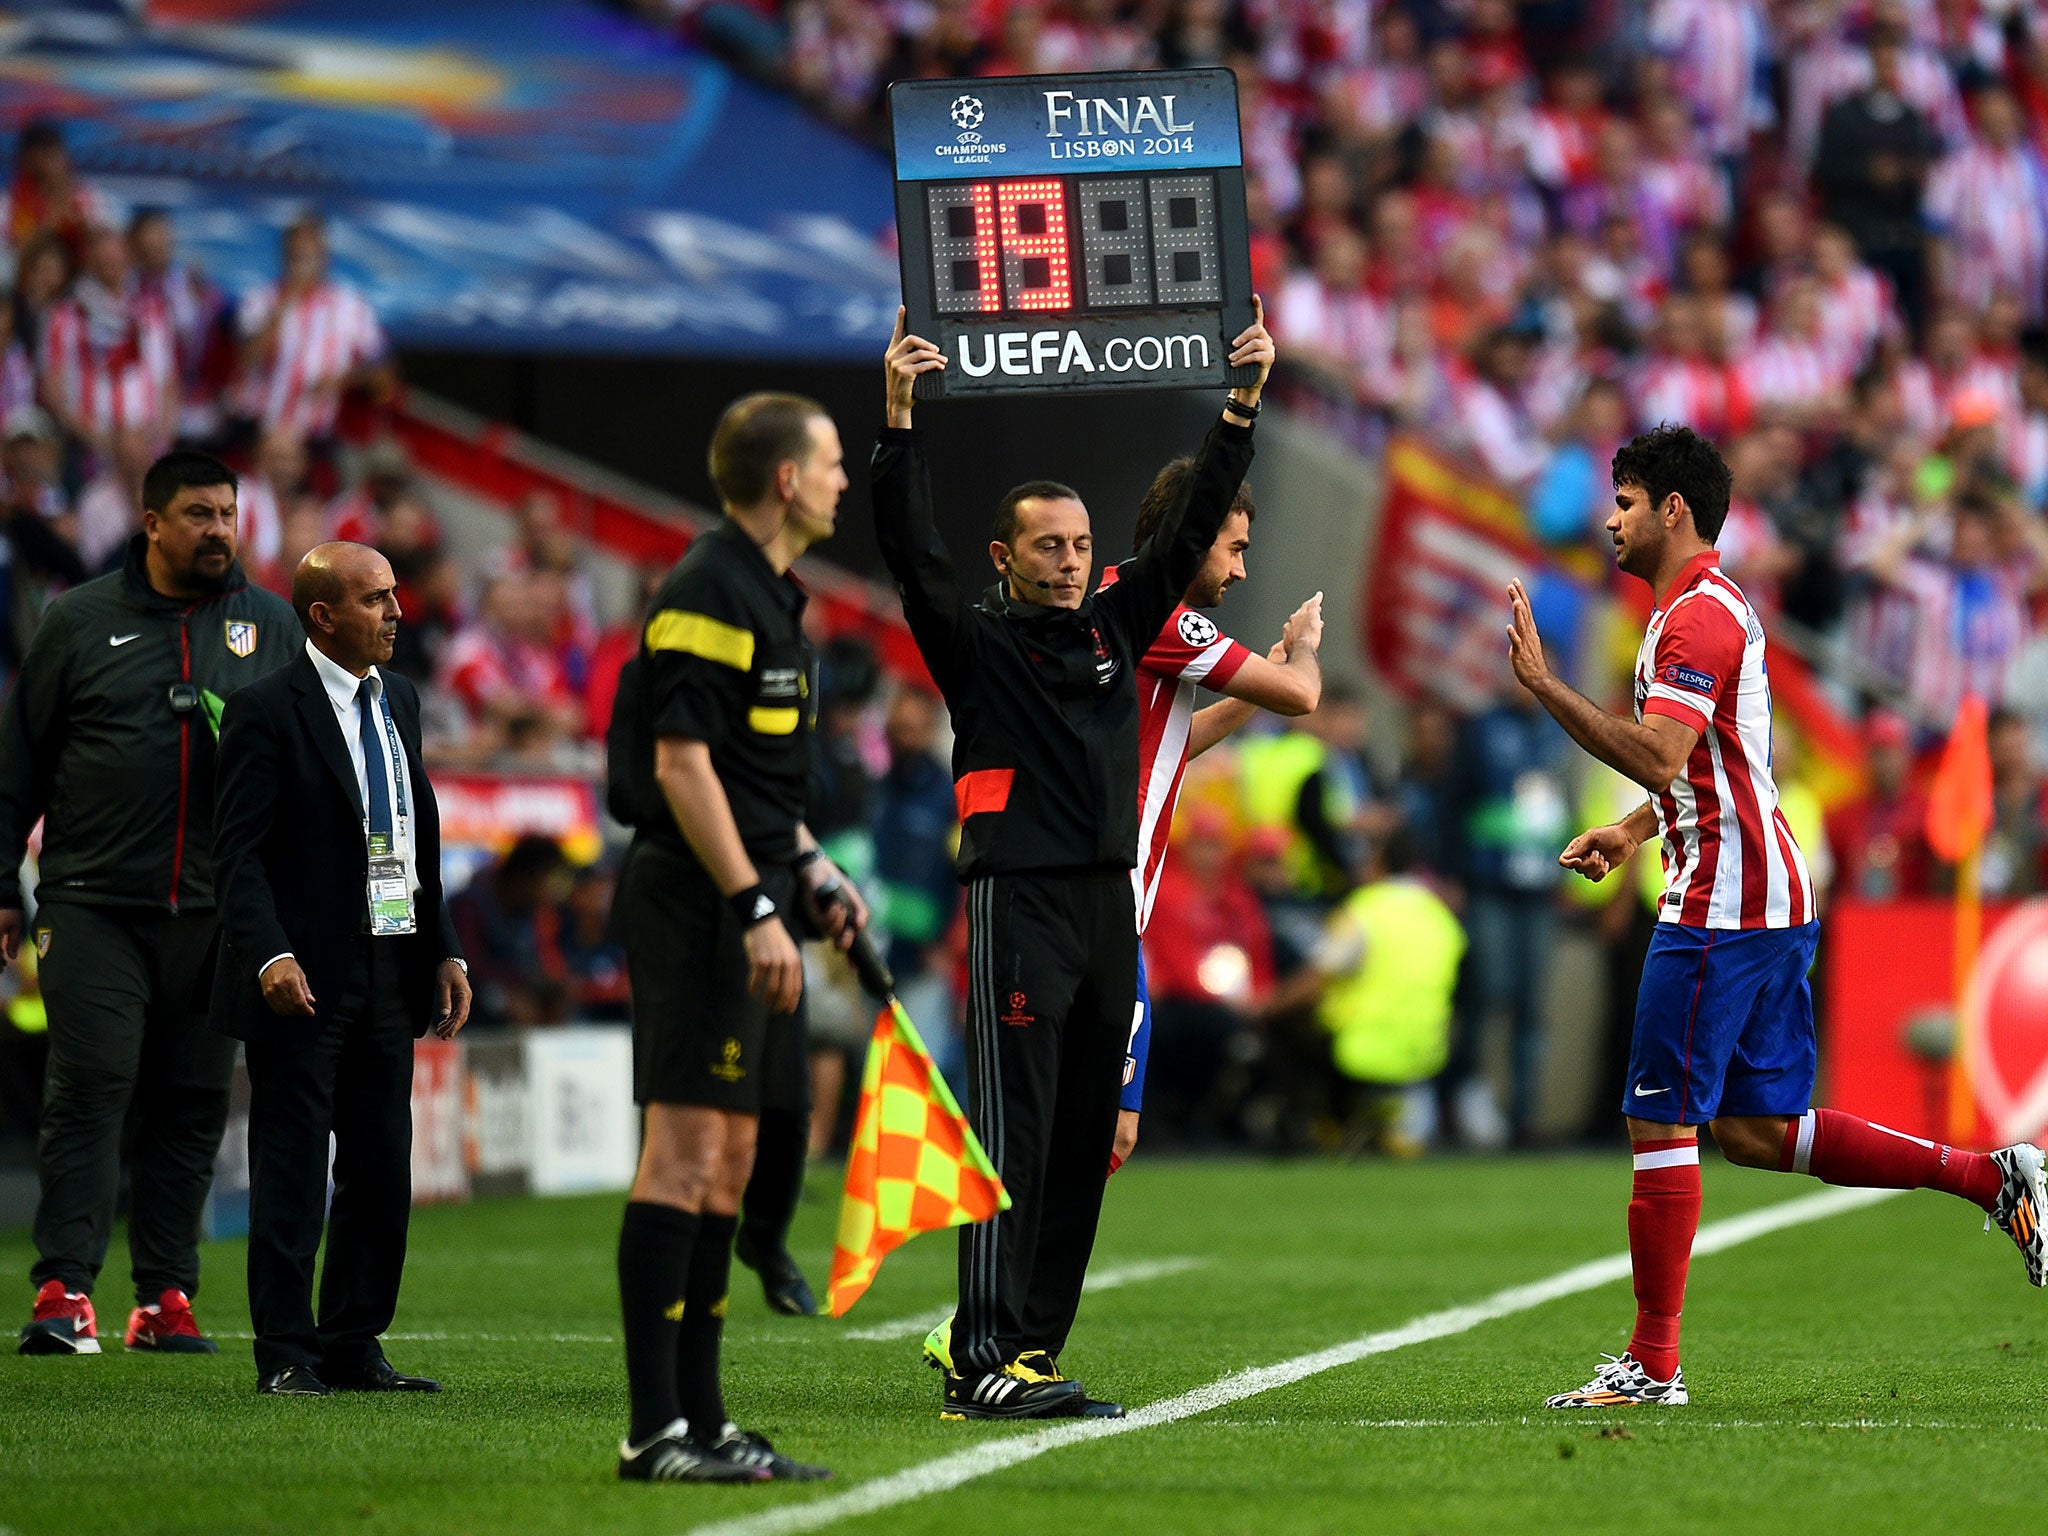 Costa lasted just nine minutes in the Champions League final